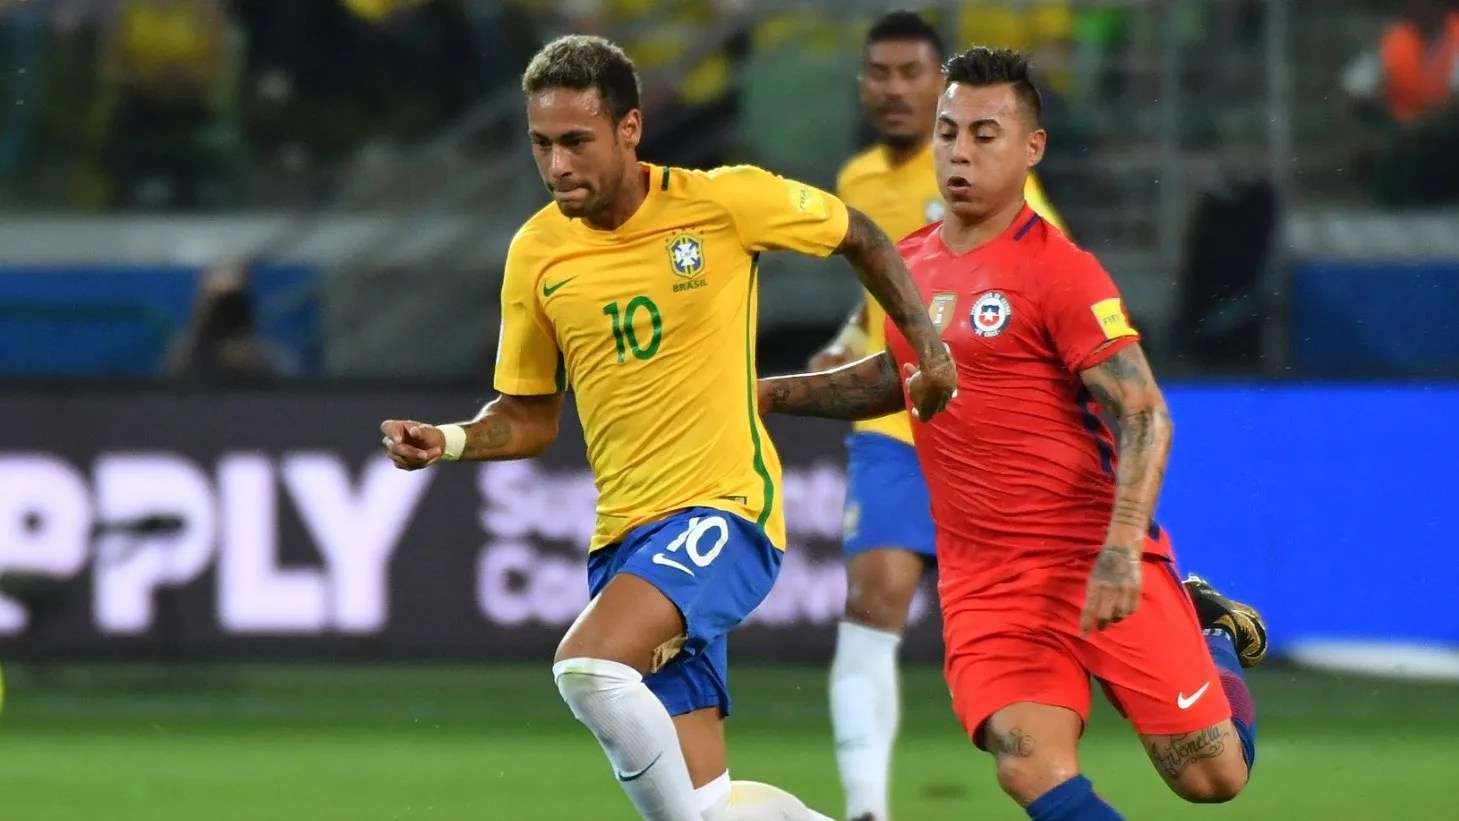 Brazil vs Chile LIVE: When and where to watch FIFA World Cup Qualifiers Live streaming? Get Team News, Predicted Lineups and Live Telecast details